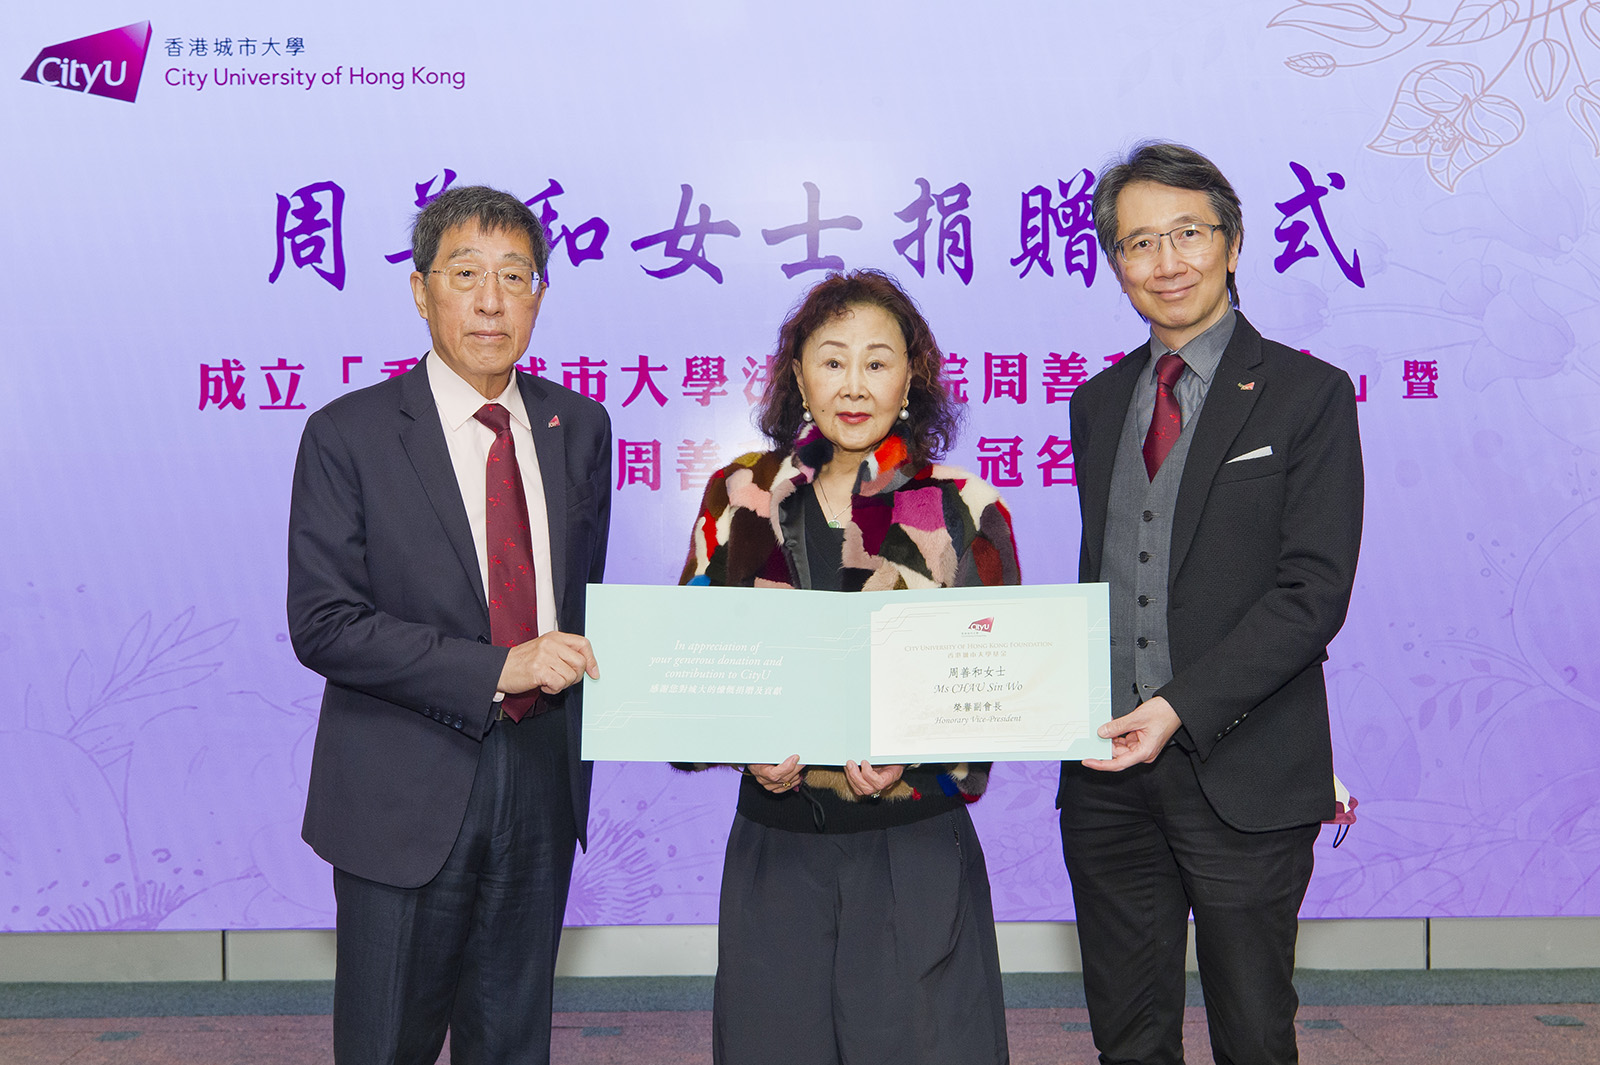 A certificate of Honorary Vice-President of CityU Foundation is presented to Ms Chau.